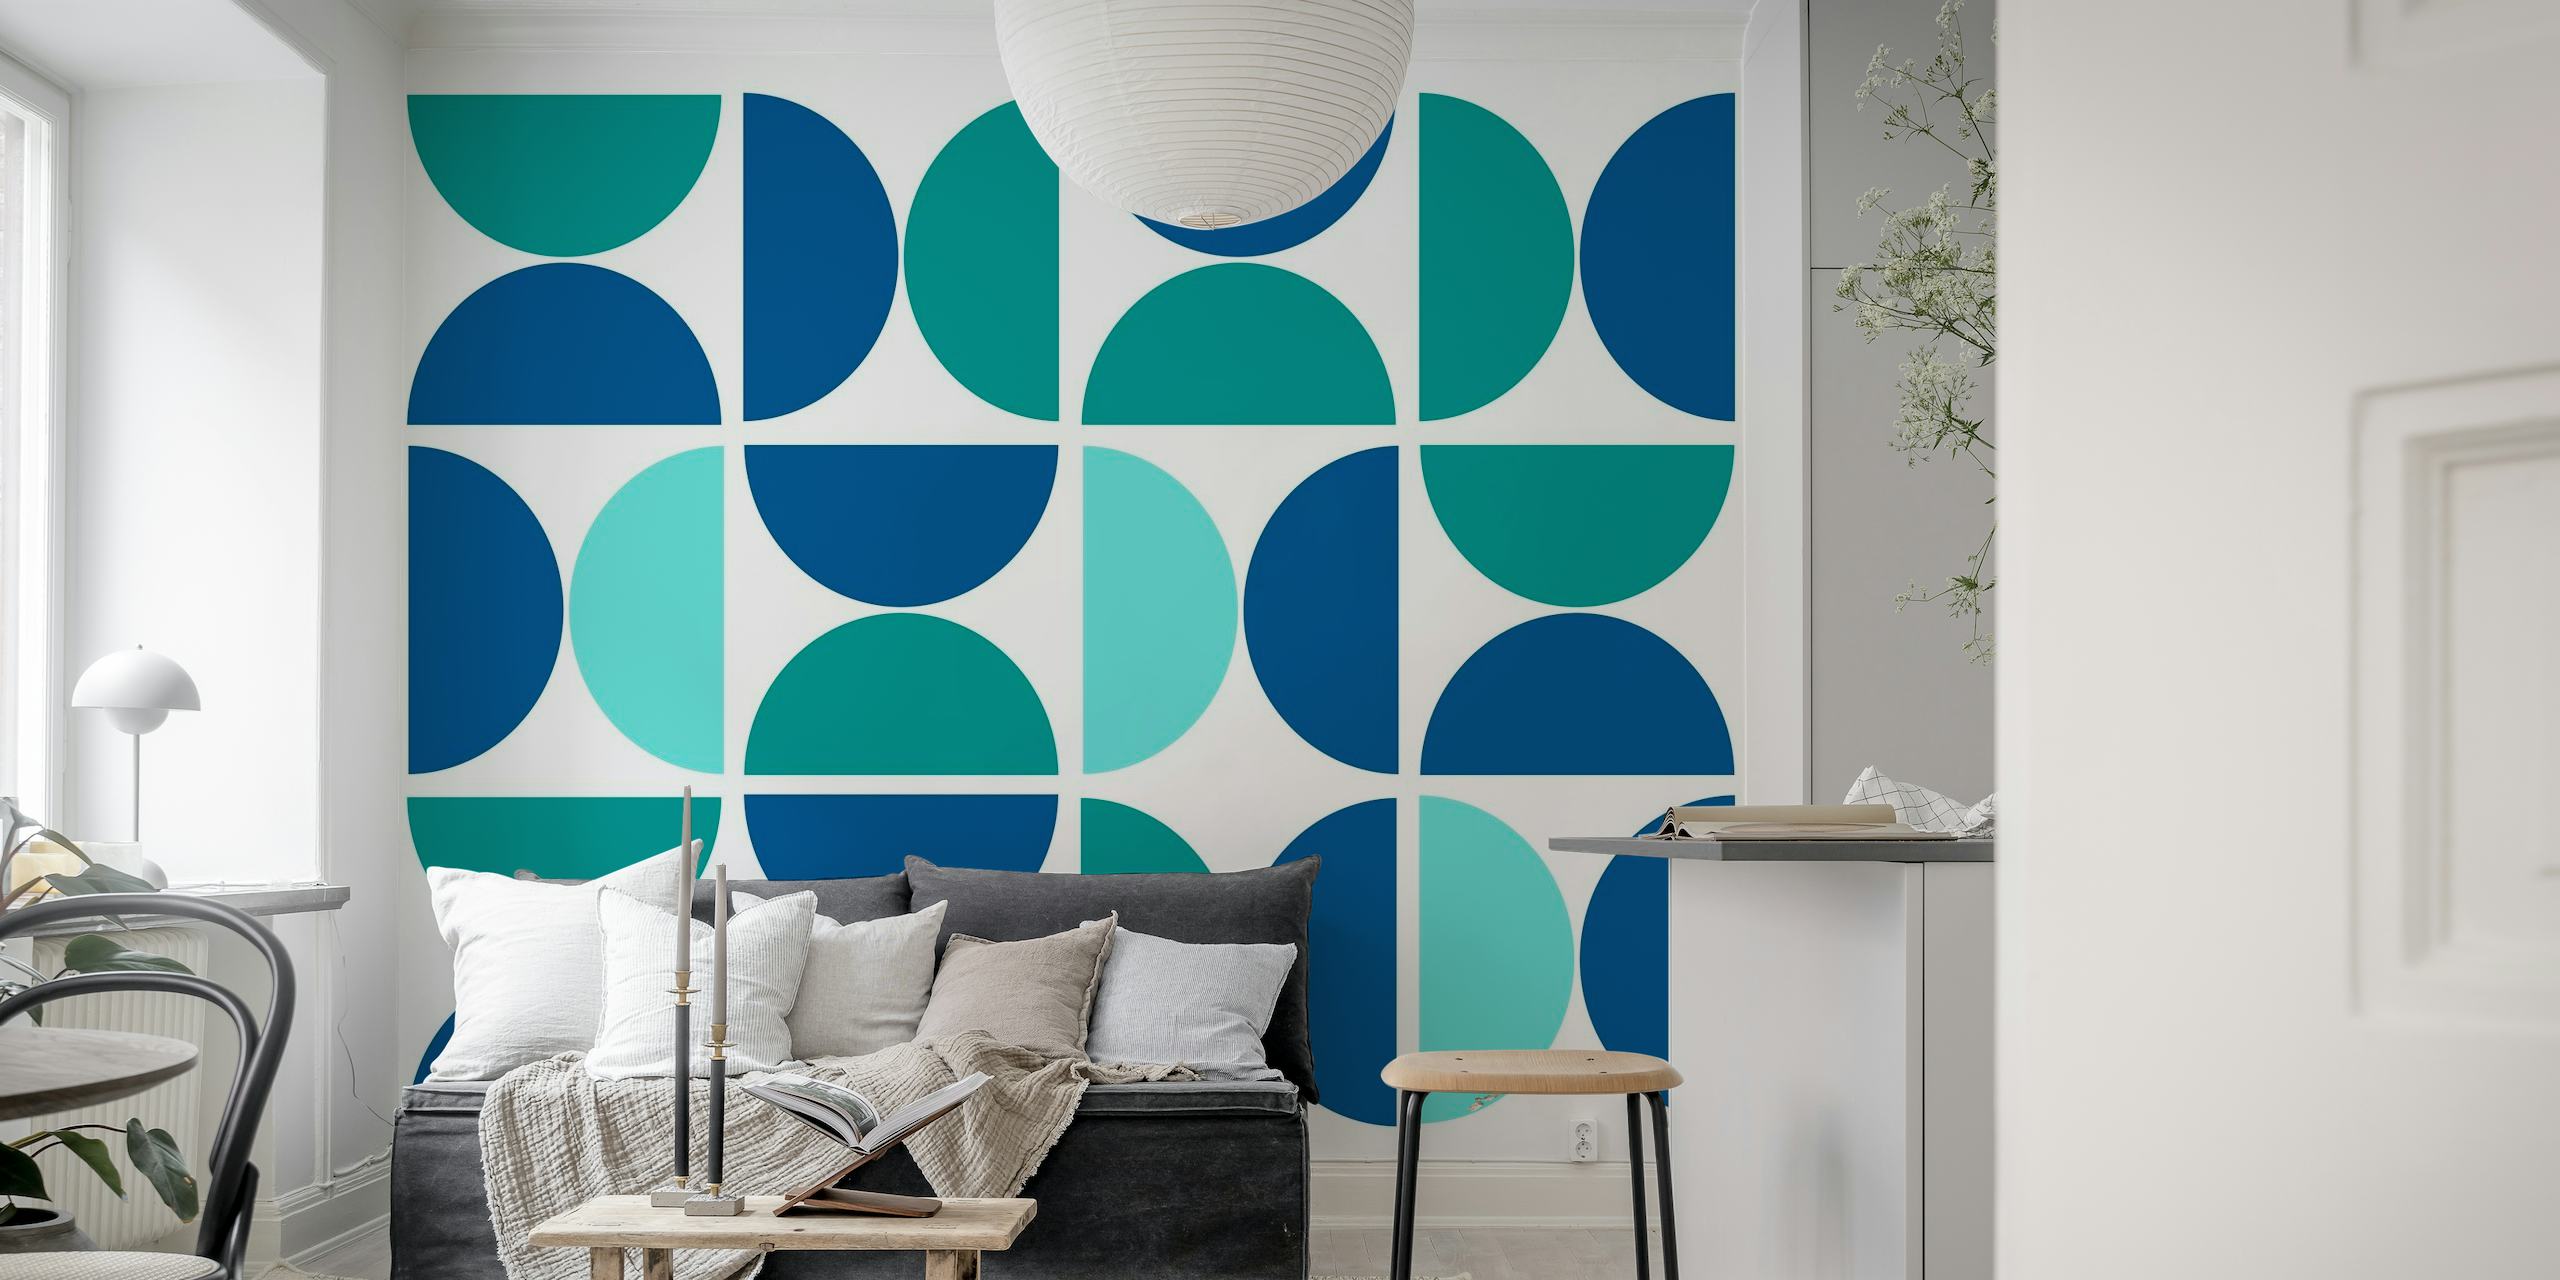 Geometric pattern wall mural with overlapping circles in shades of blue